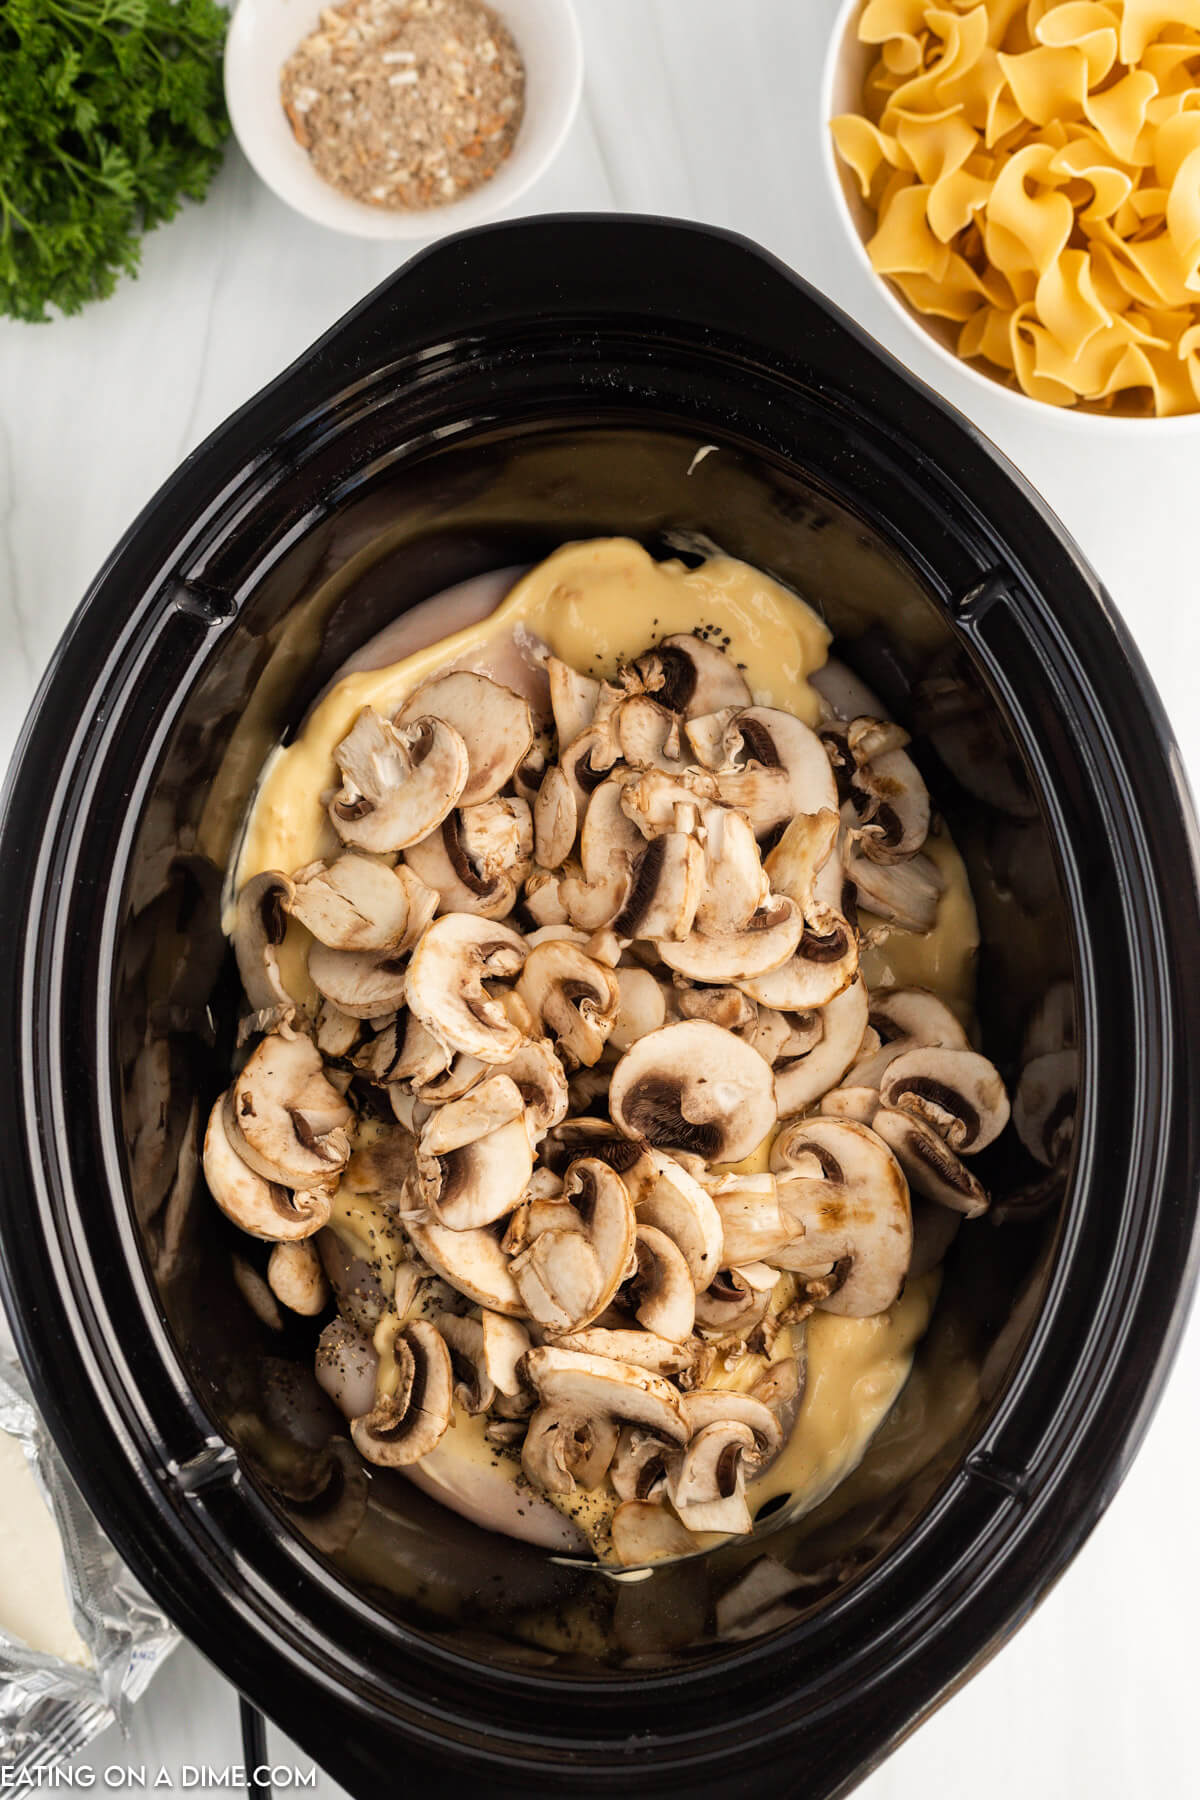 Topping chicken breast with slice mushrooms